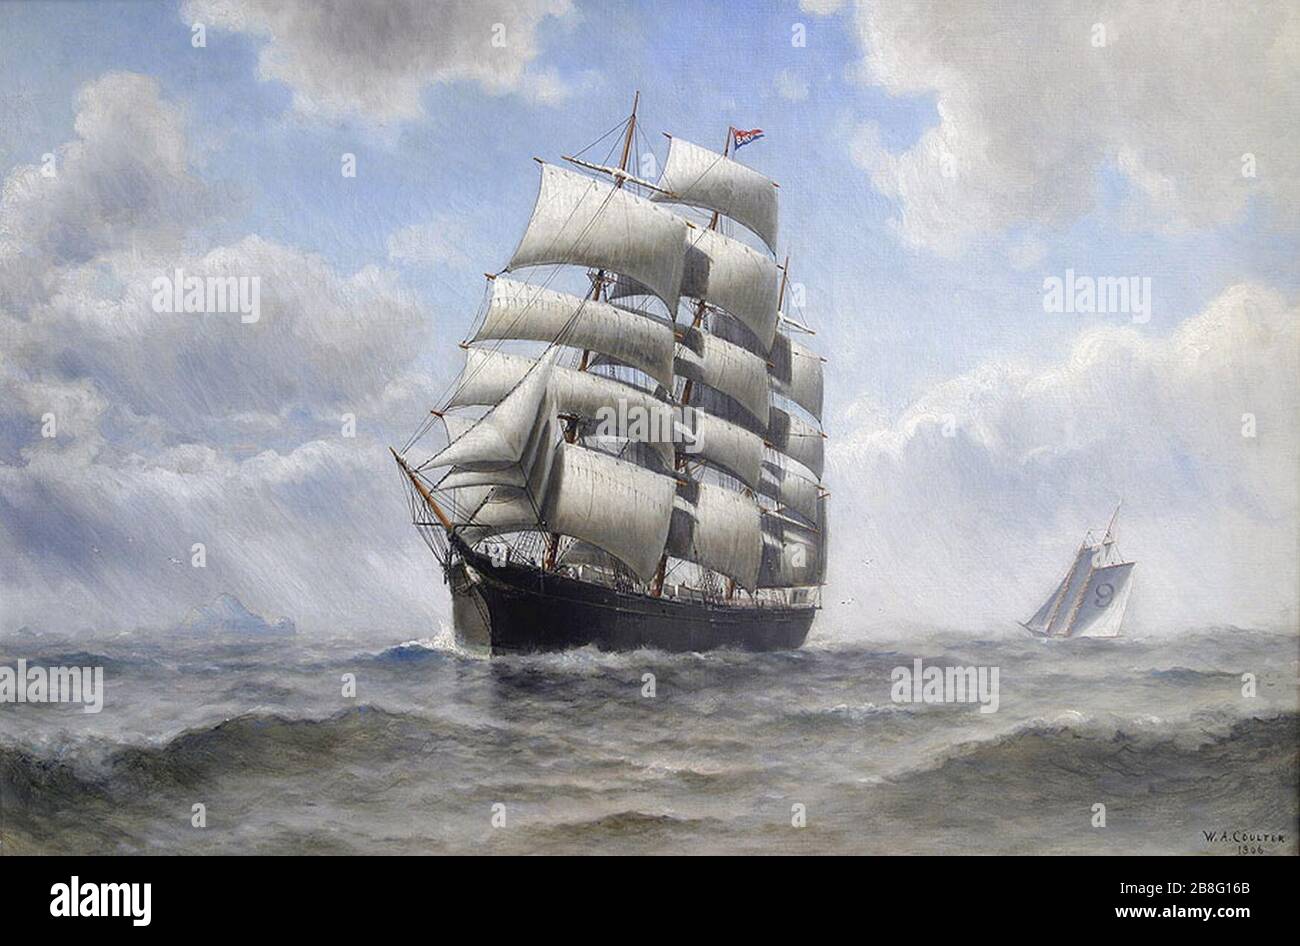 Glory of the Seas Off the Farallon Islands, by William A. Coulter 13220. Stock Photo